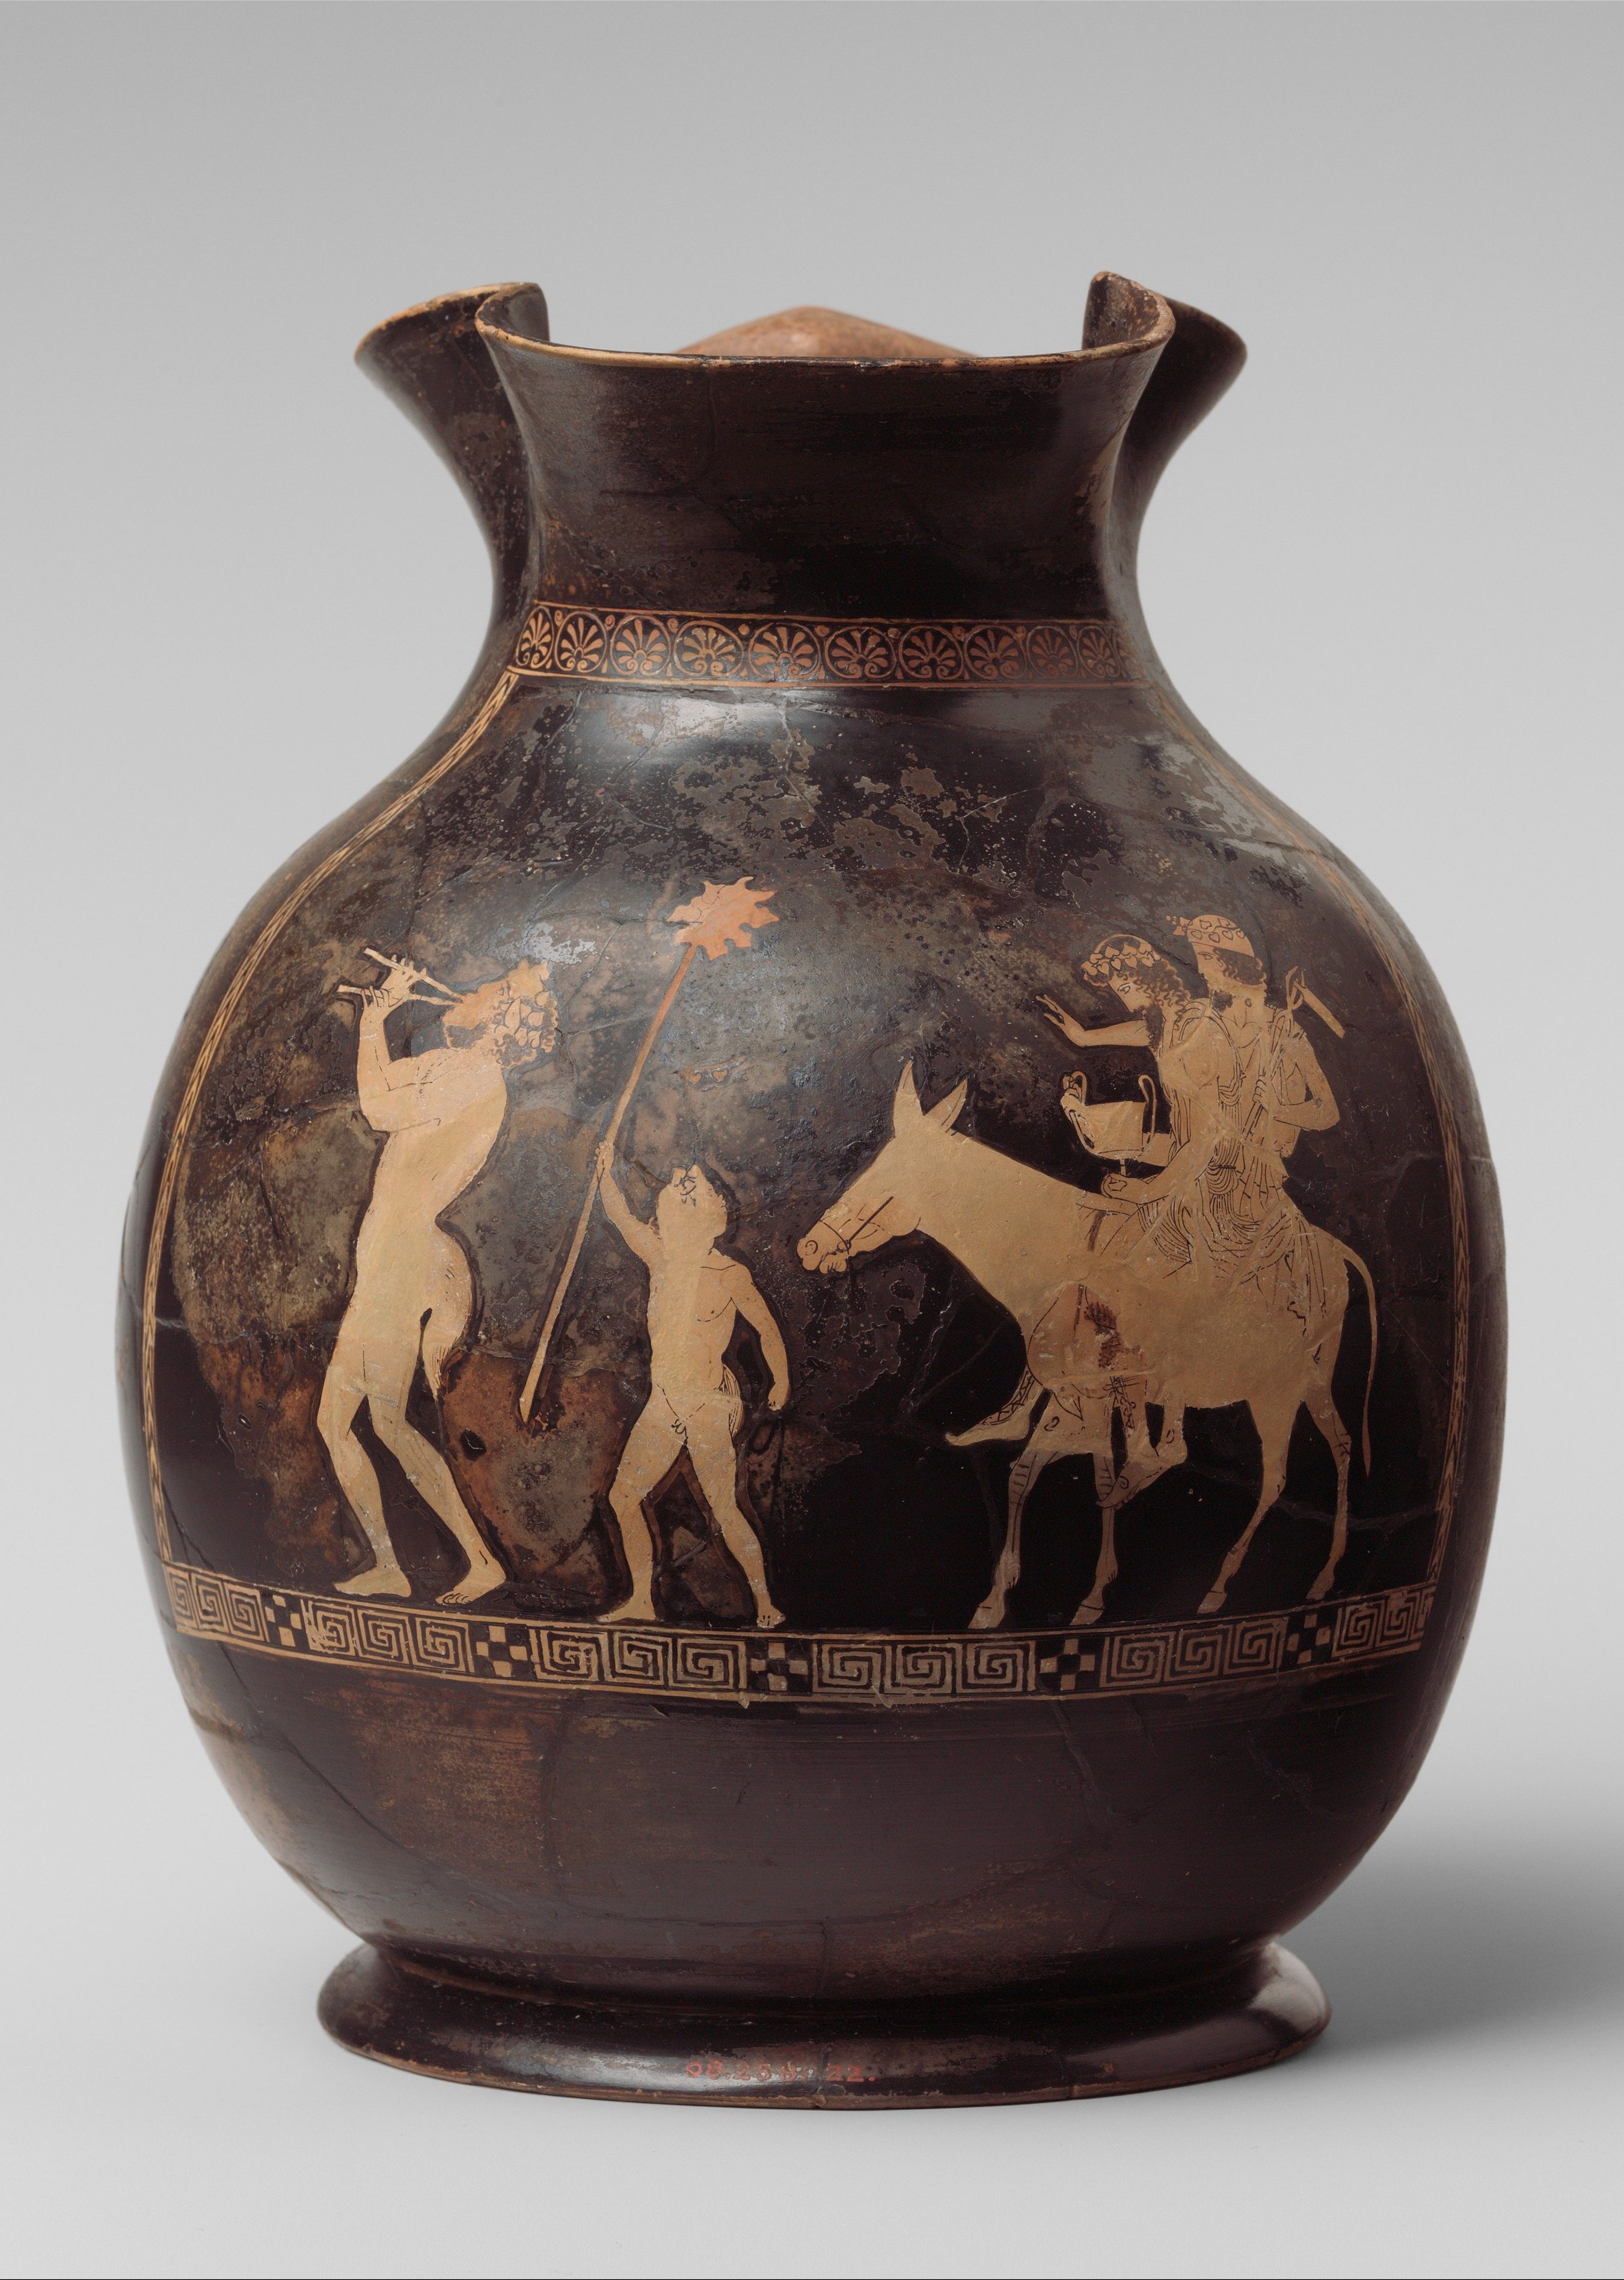 Hephaestus and Dionysus ride a donkey. A silenus playing a flute, and a small person holding a thyrsus, walk ahead.